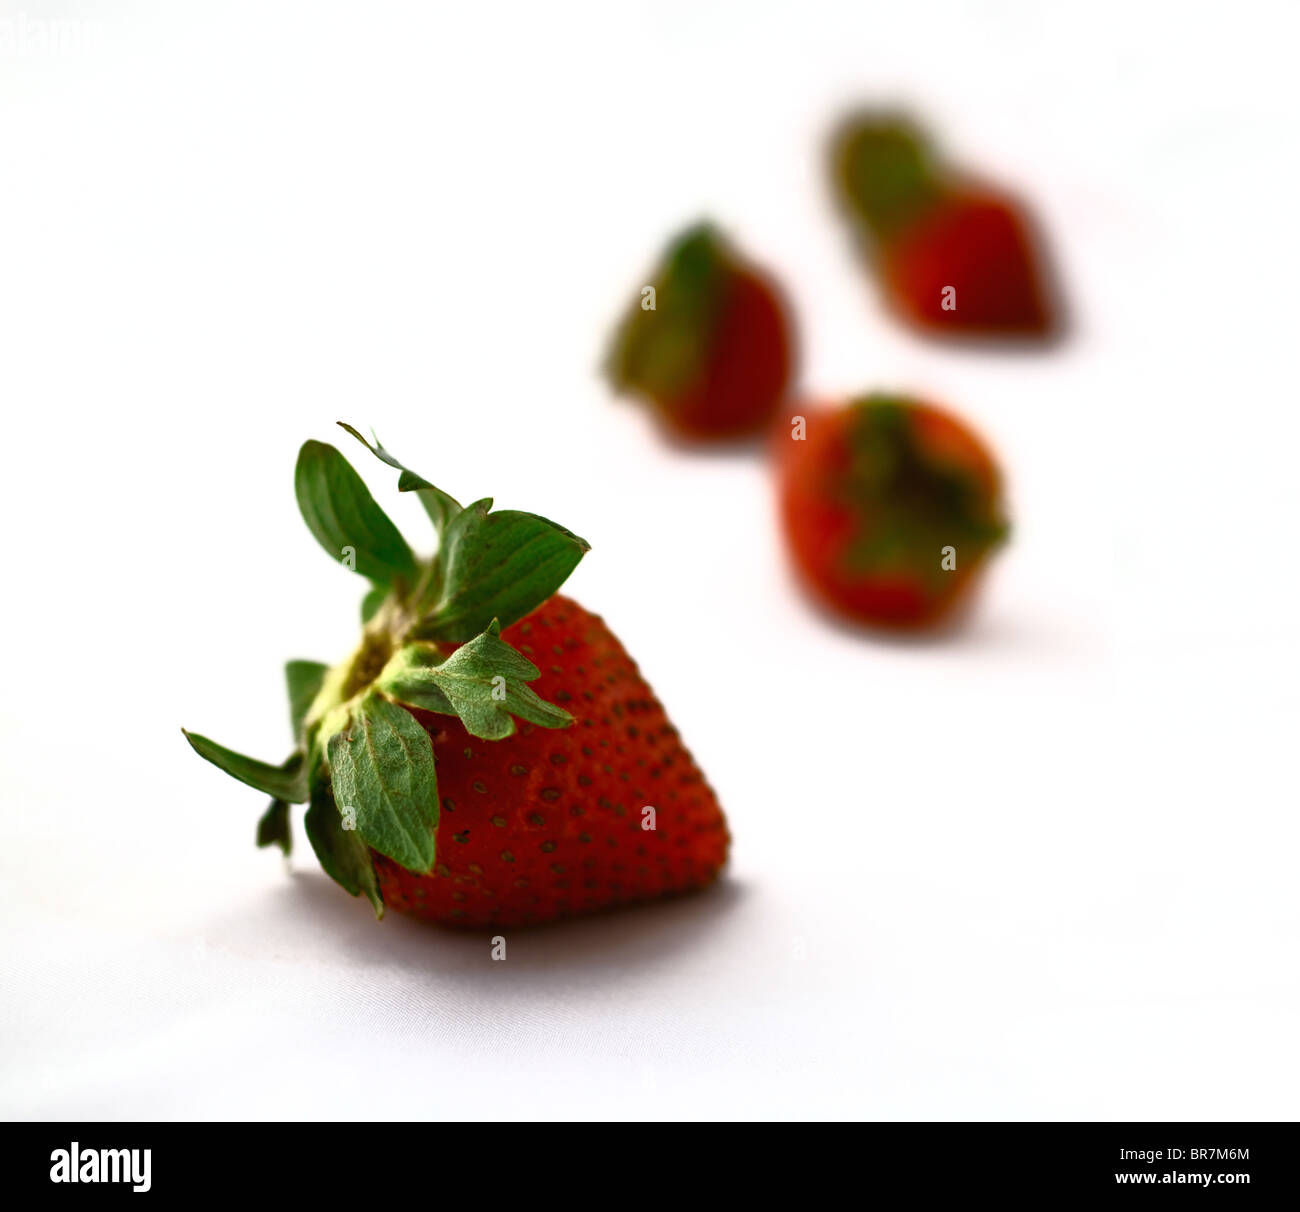 Four strawberry's on a white background with one of them in focus. Stock Photo